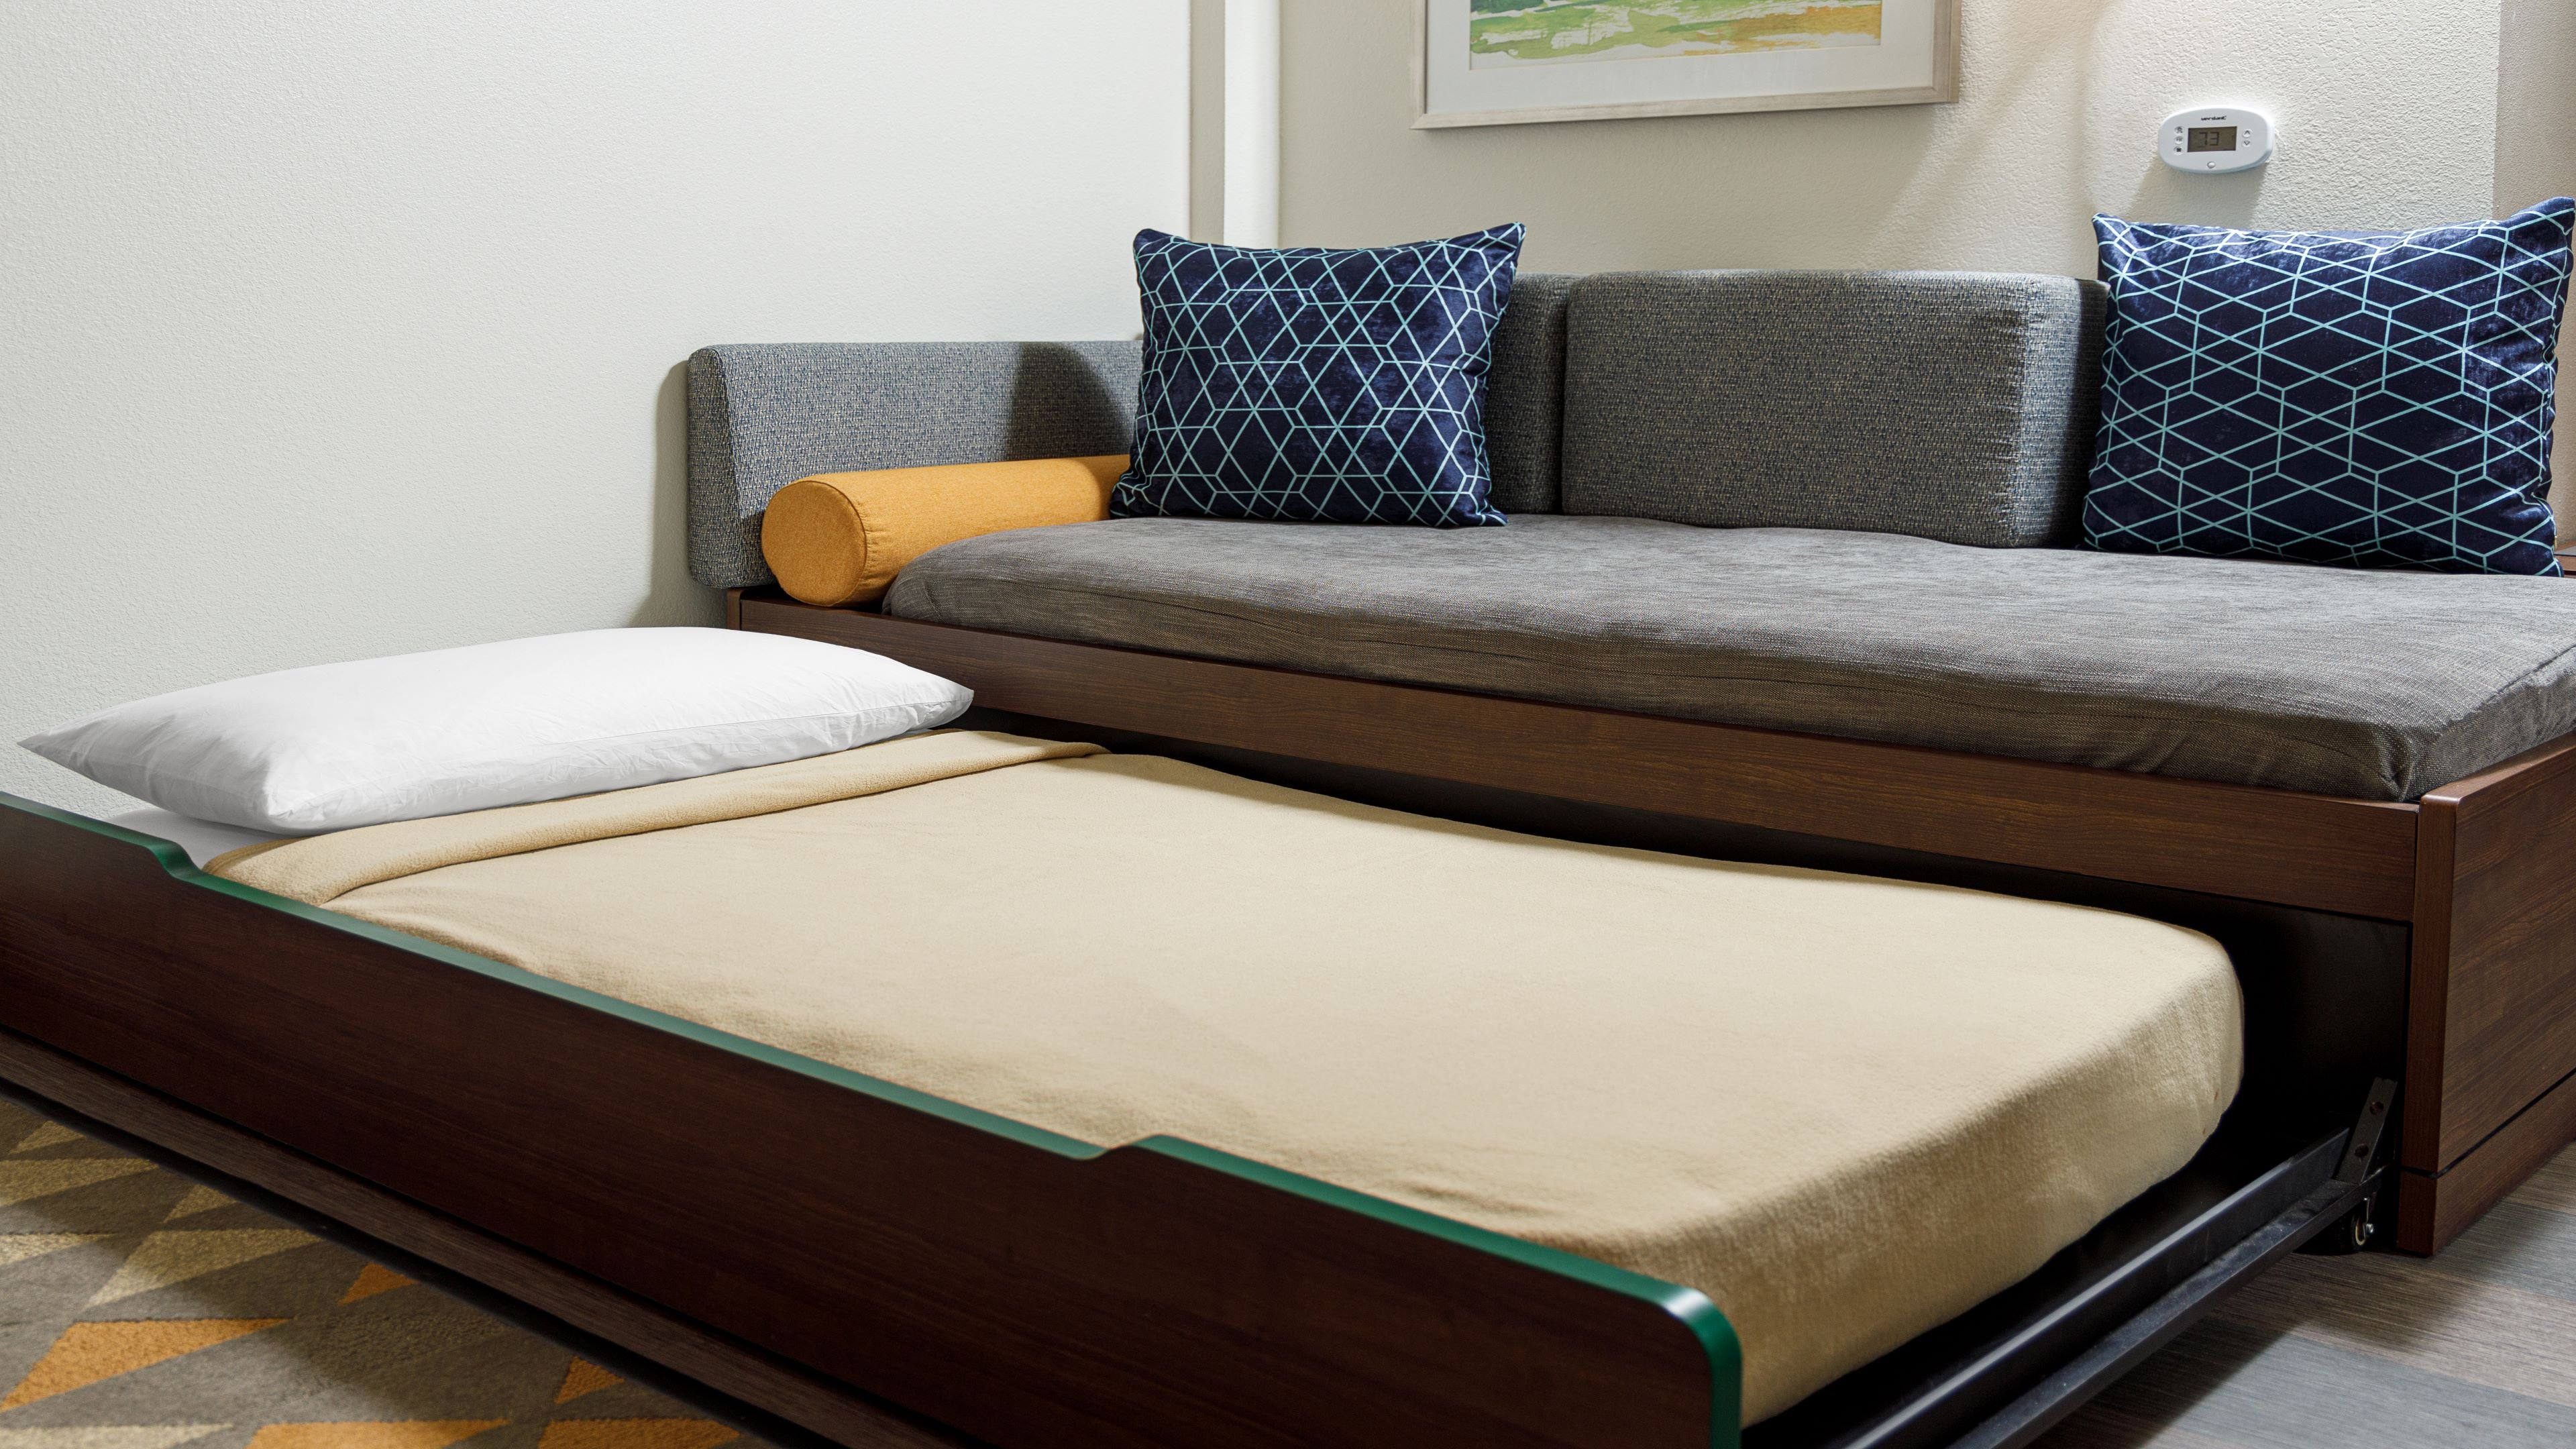 A trundle bed gives you extra sleeping space!